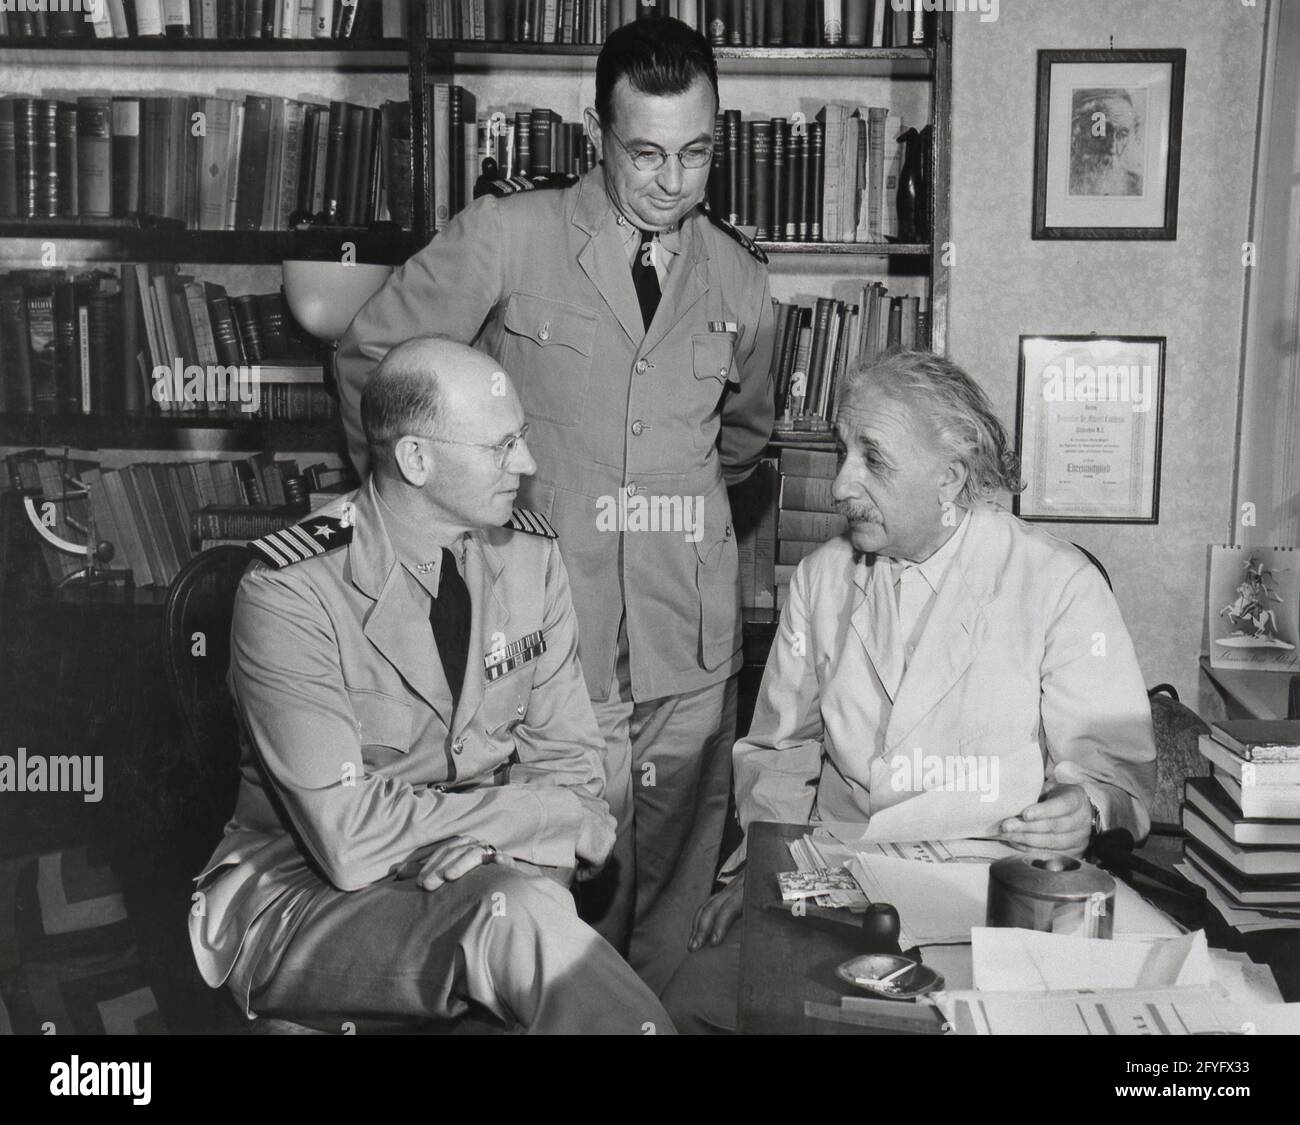 October 1943 Albert Einstein discusses documents with Naval officers in the study of his Princeton, New Jersey home. With him are Captain Geoffrey E. Sage, commanding officer of the United States Naval Training School in Princeton, and Lieutenant Commander Frederick L. Douthit of the United States Naval Reserves Stock Photo